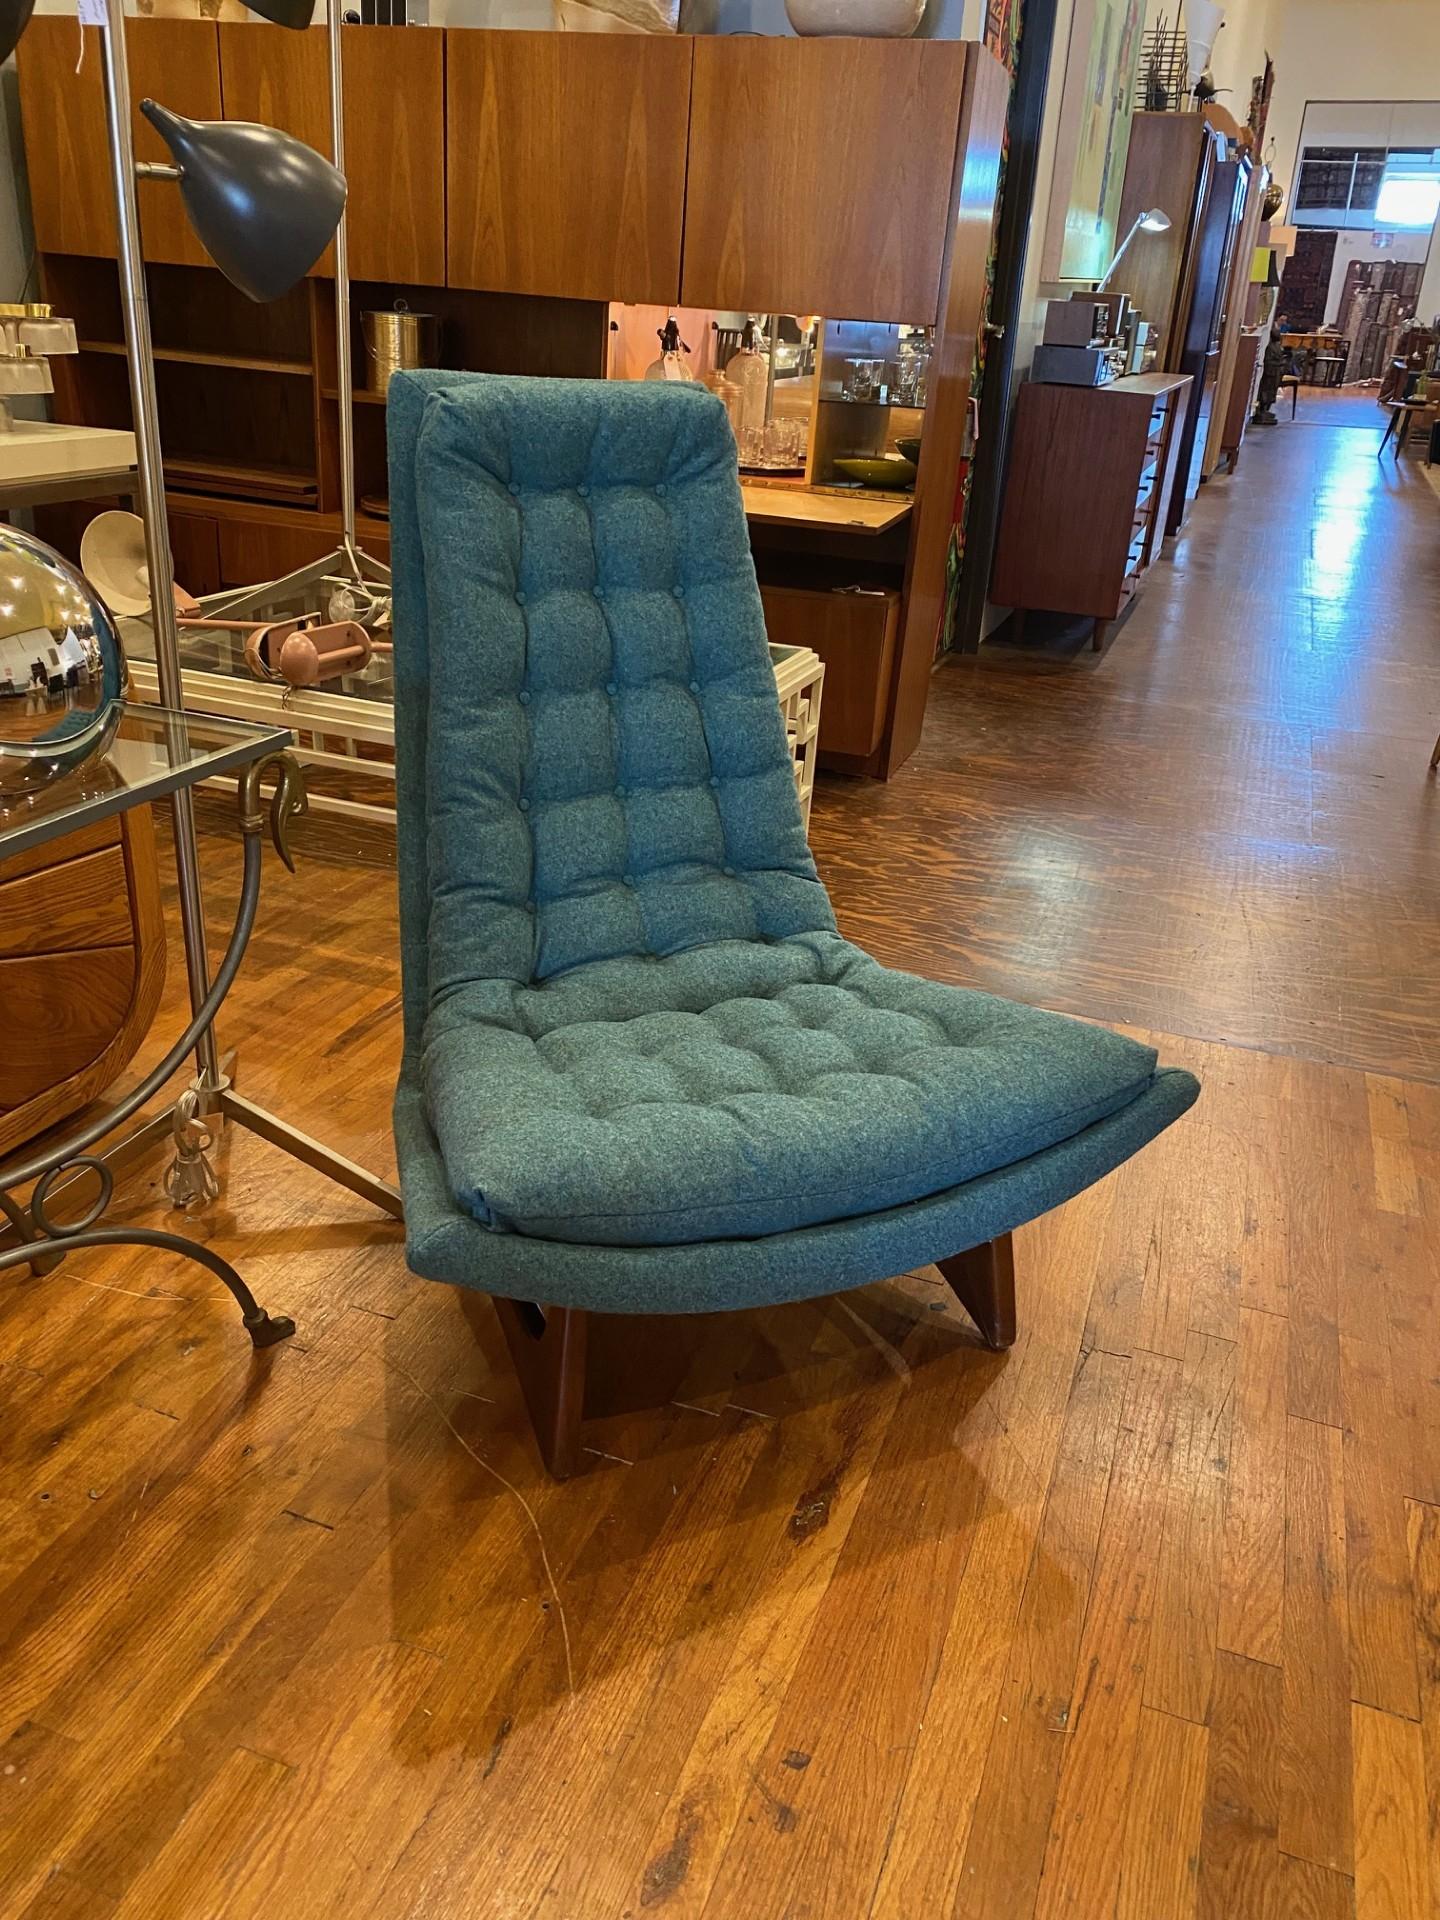 Incredible gondola club/lounge chair, attributed to the renowned designer Adrian Pearsall for Craft Associates. Made in the USA during the 1960s, this chair exudes 1960s mod elegance. This chair boasts luxurious, sculptural proportions, standing